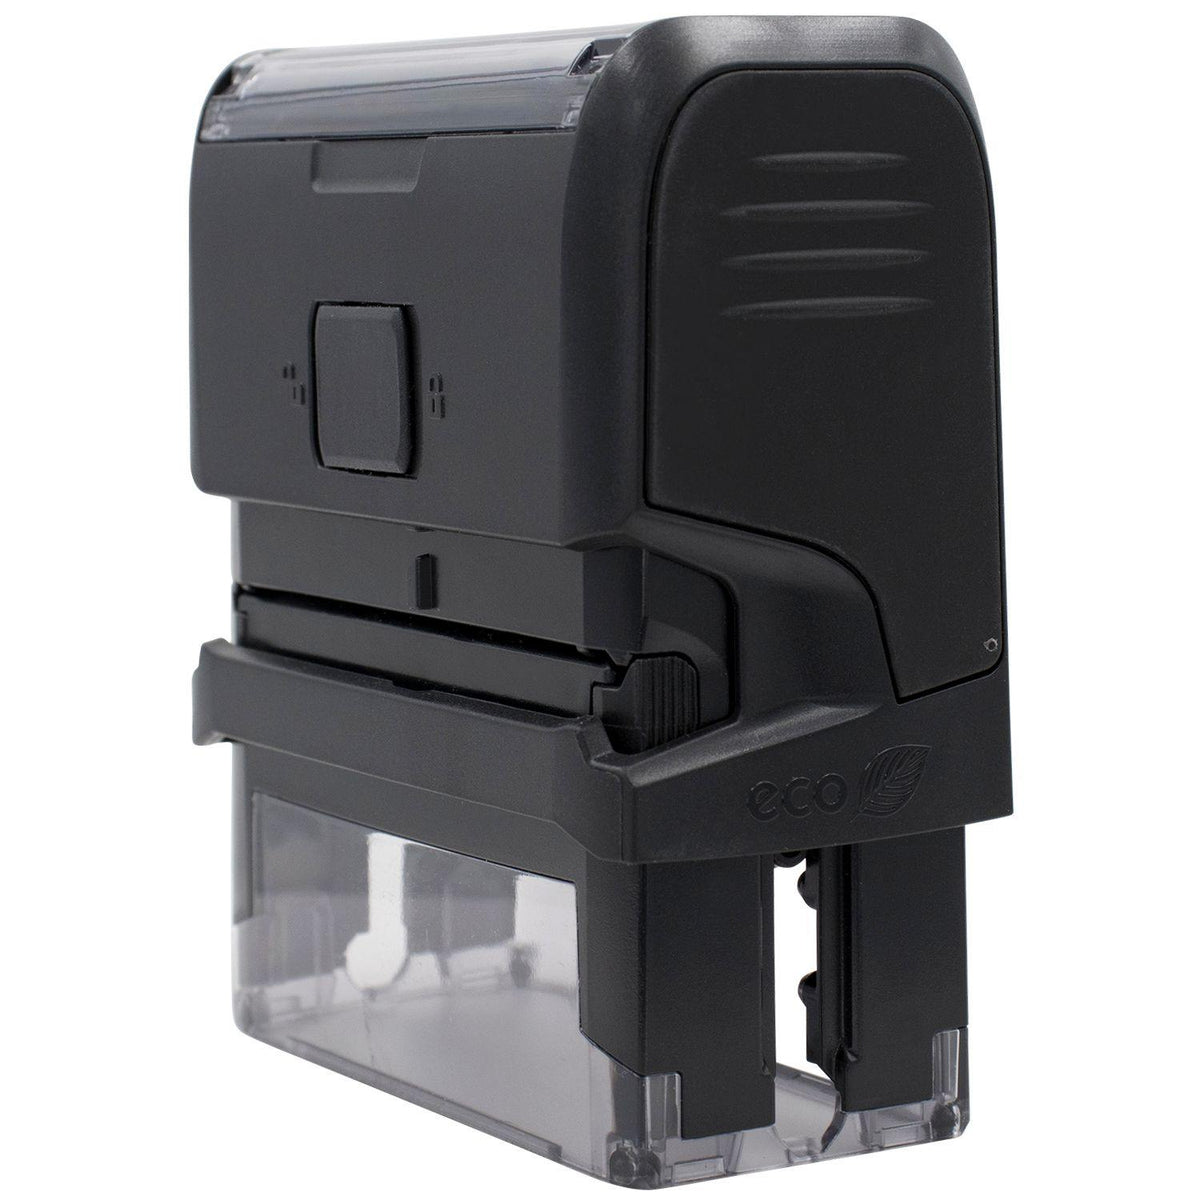 Large Self-Inking Narrow Font Cancelled Stamp - Engineer Seal Stamps - Brand_Trodat, Impression Size_Large, Stamp Type_Self-Inking Stamp, Type of Use_Business, Type of Use_Finance, Type of Use_Office, Type of Use_Professional